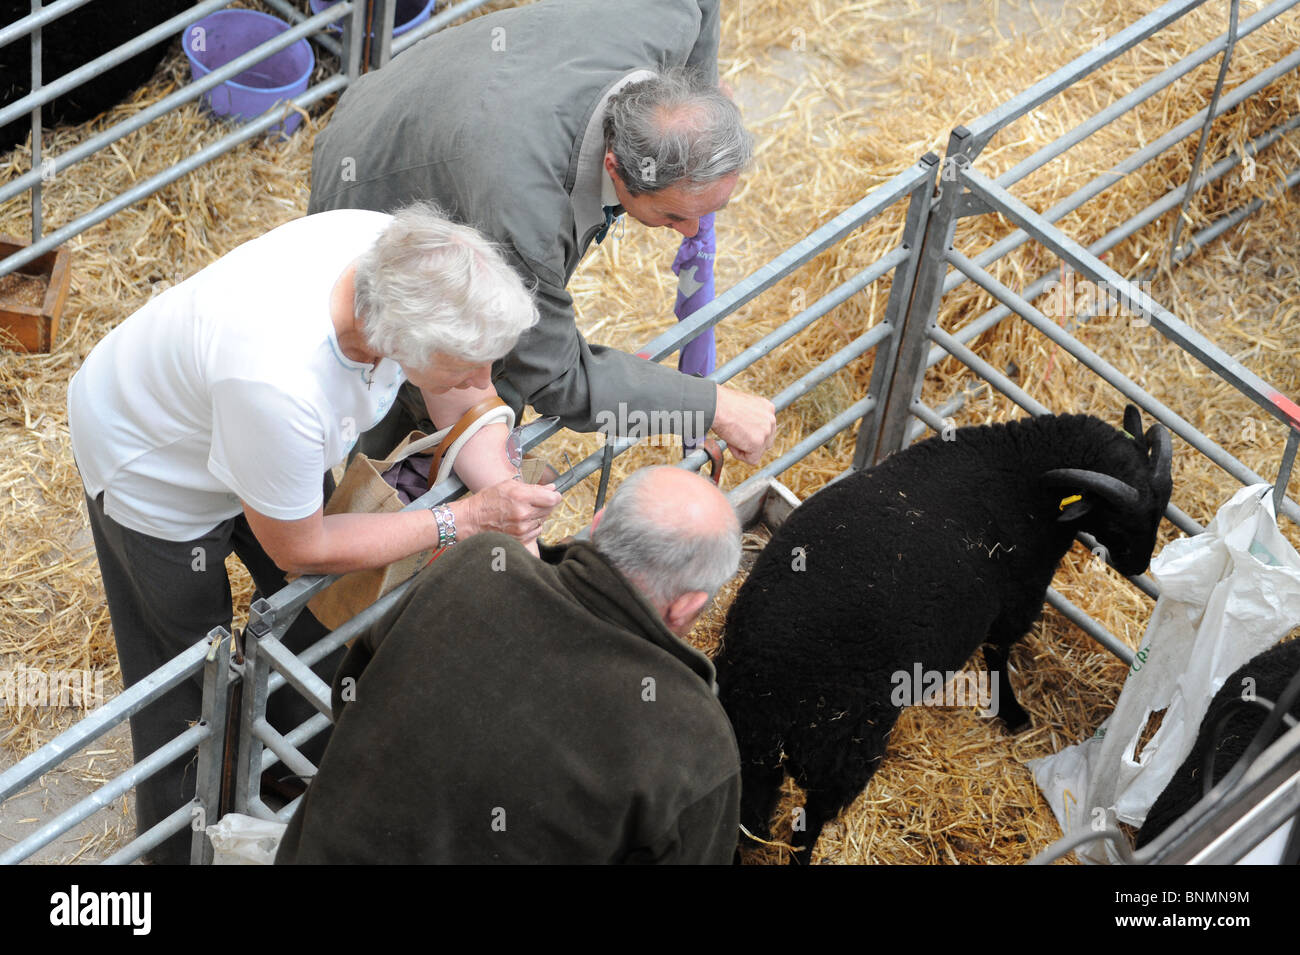 Royal Welsh Show 2010 farmers discuss merits of a black sheep in the indoor pens Stock Photo